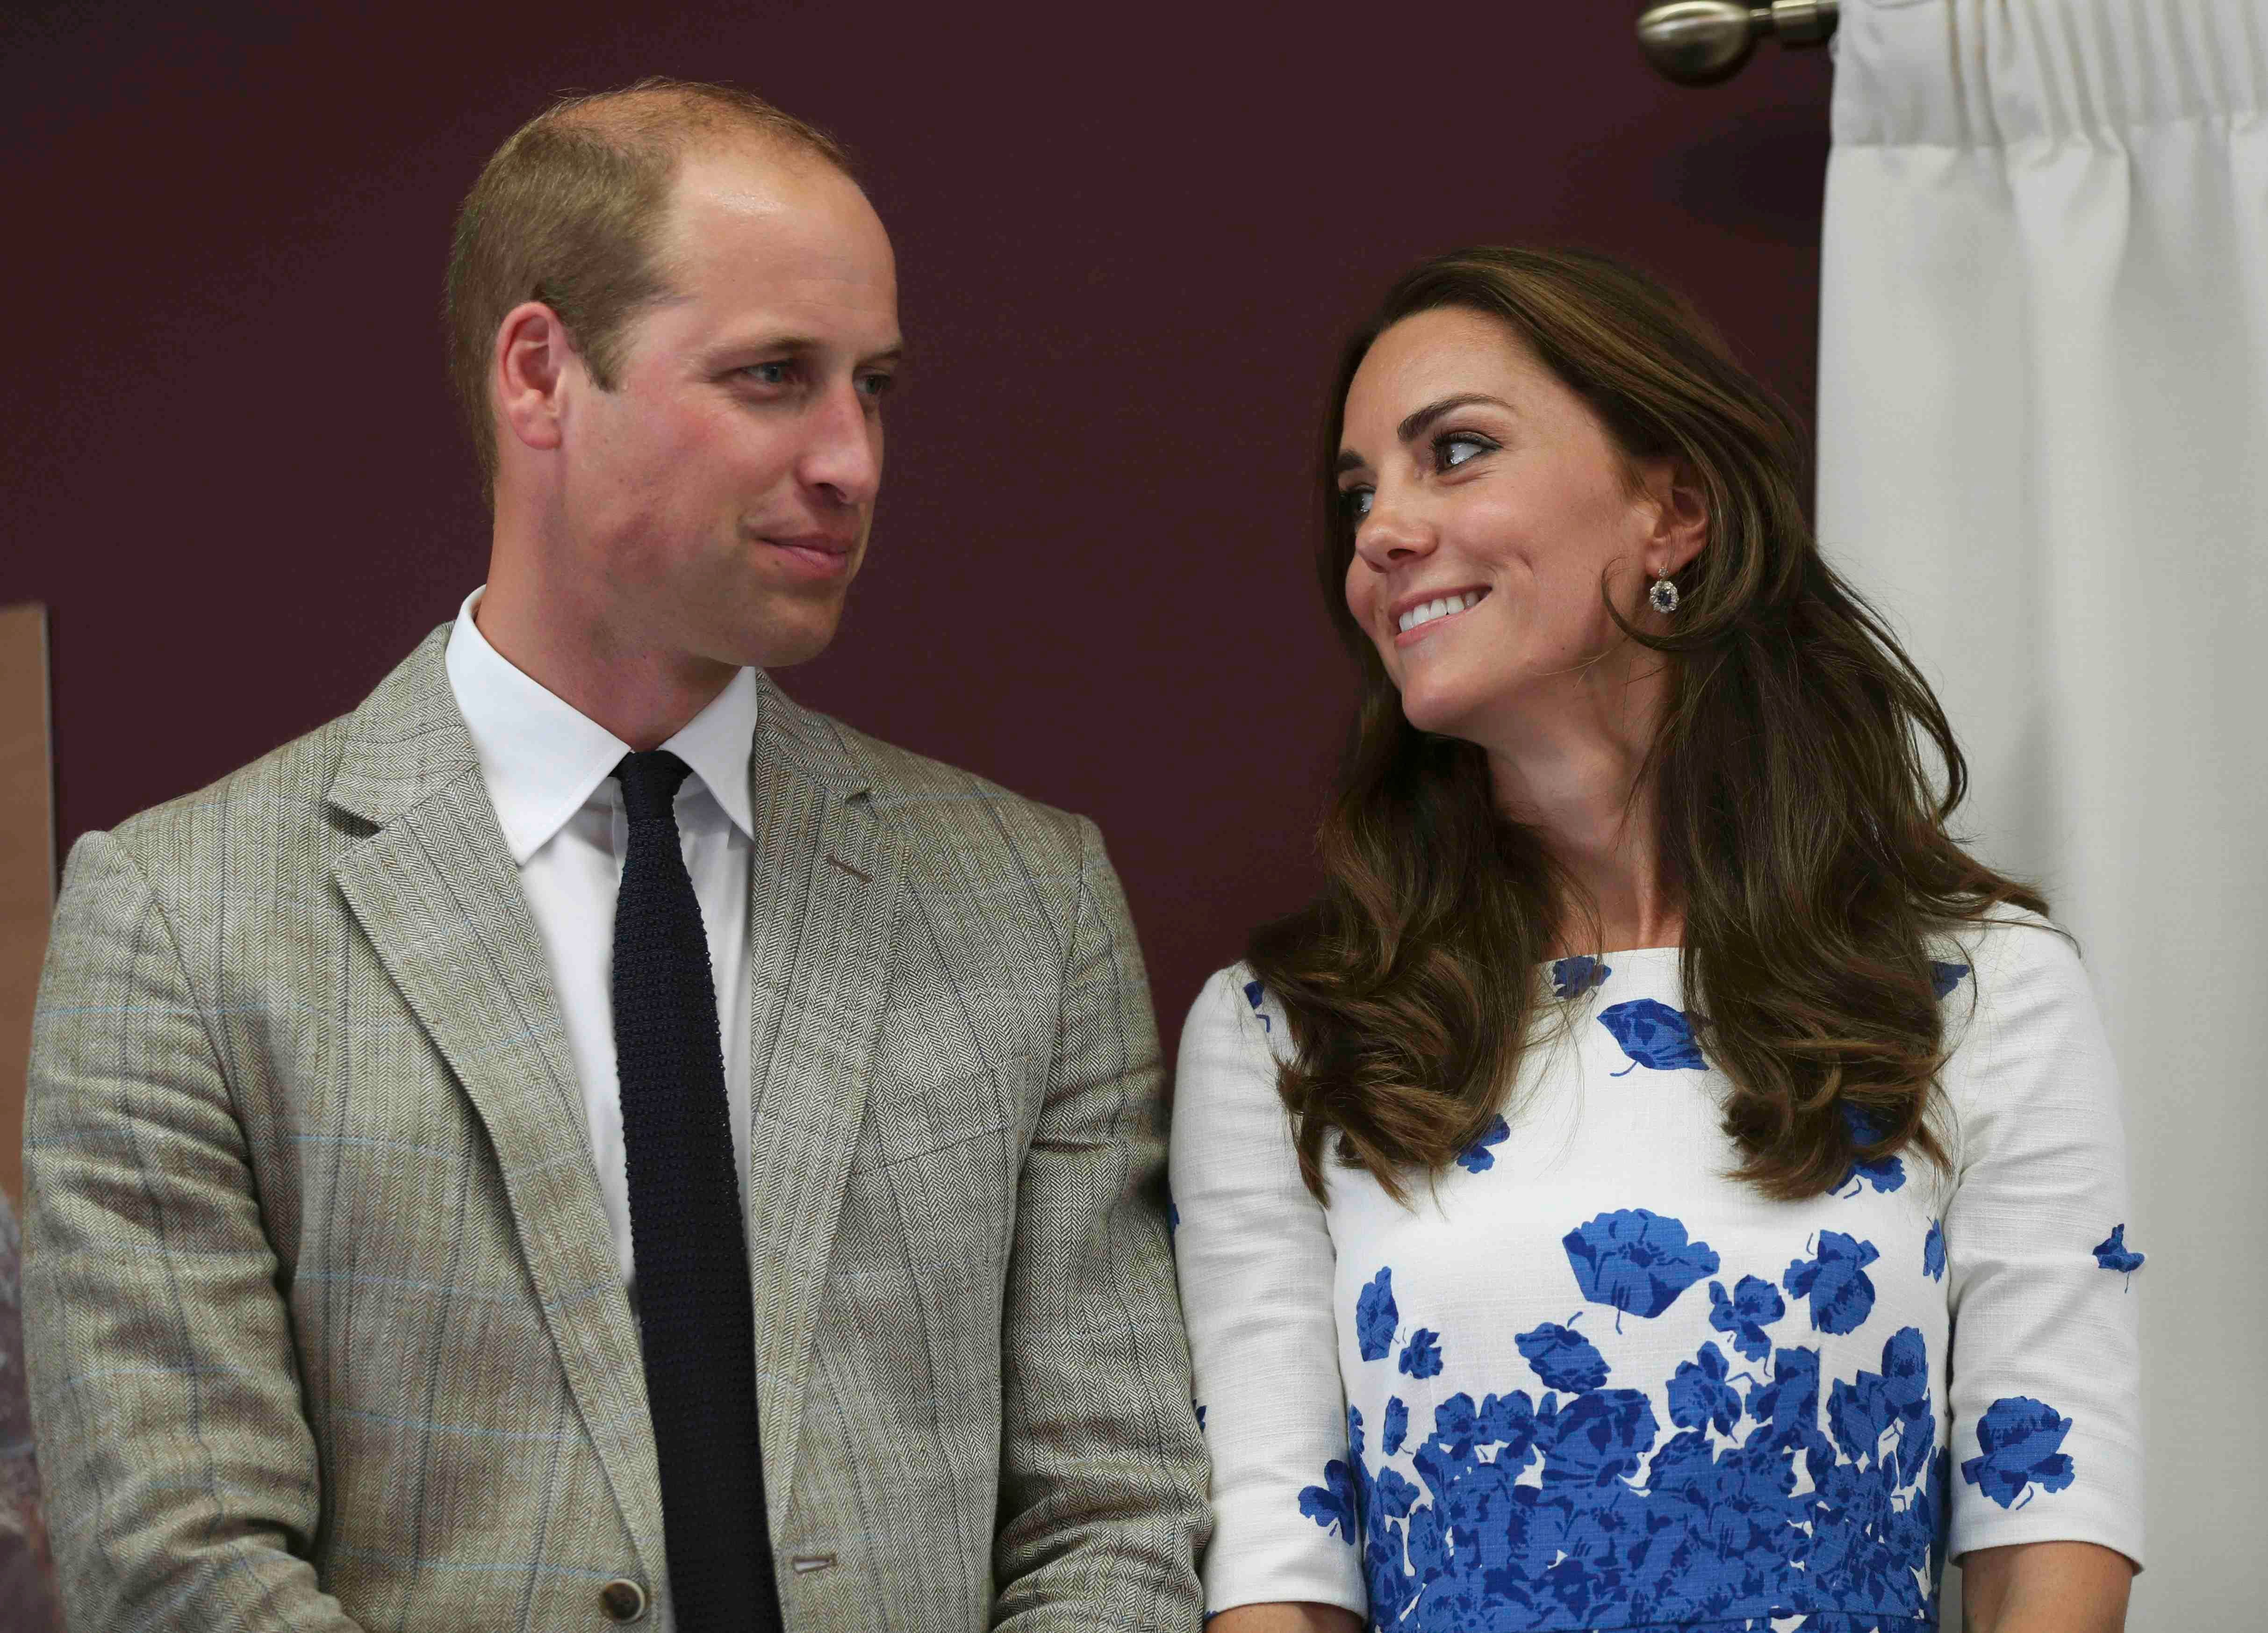 Prince William and Duchess of Kate during their visit to Keech Hospice Care on August 24, 2016, in Luton, England | Photo: Eddie Keogh - WPA Pool/Getty Images